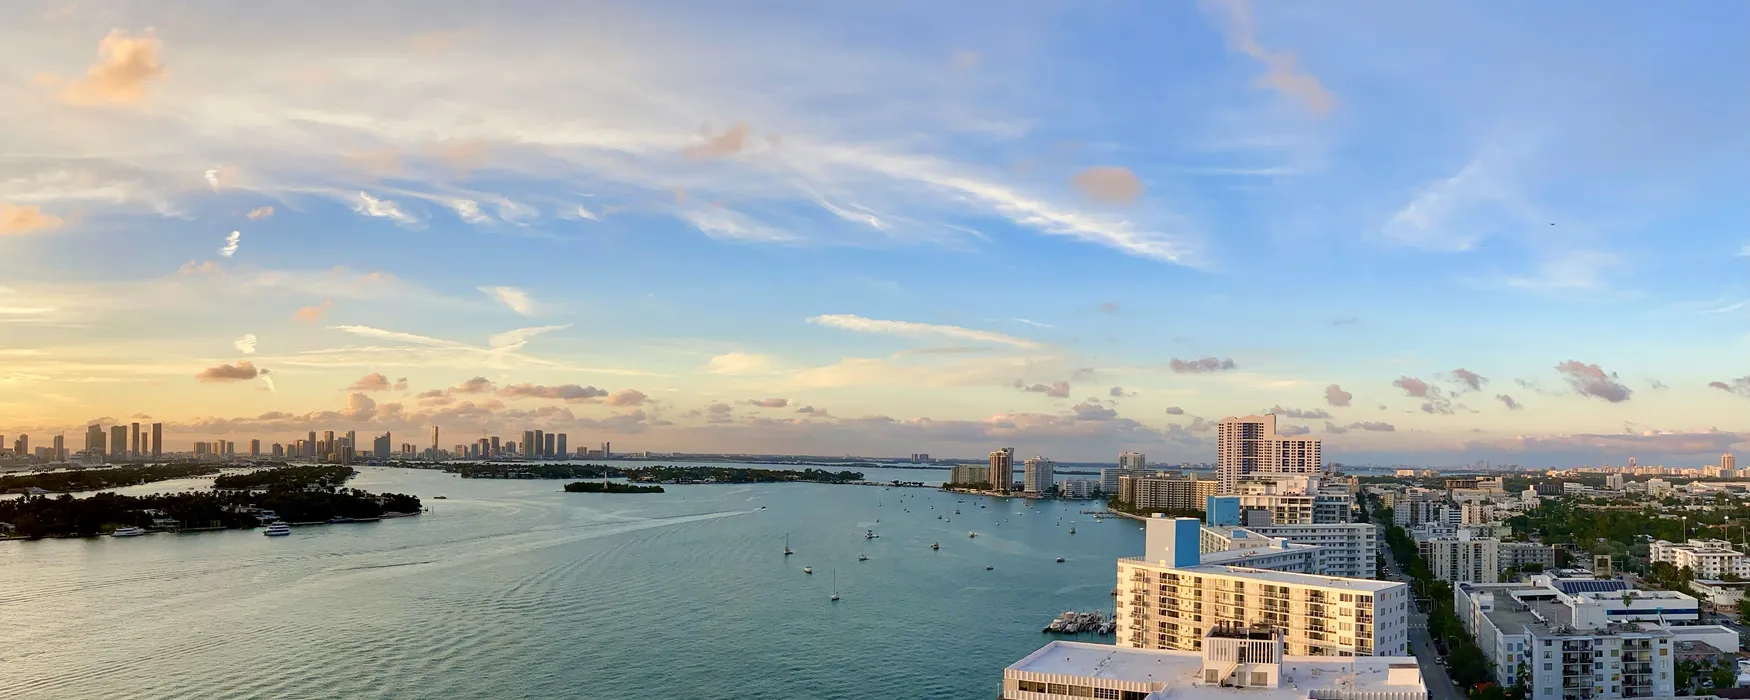 Best things to do in Miami - including an amazing view